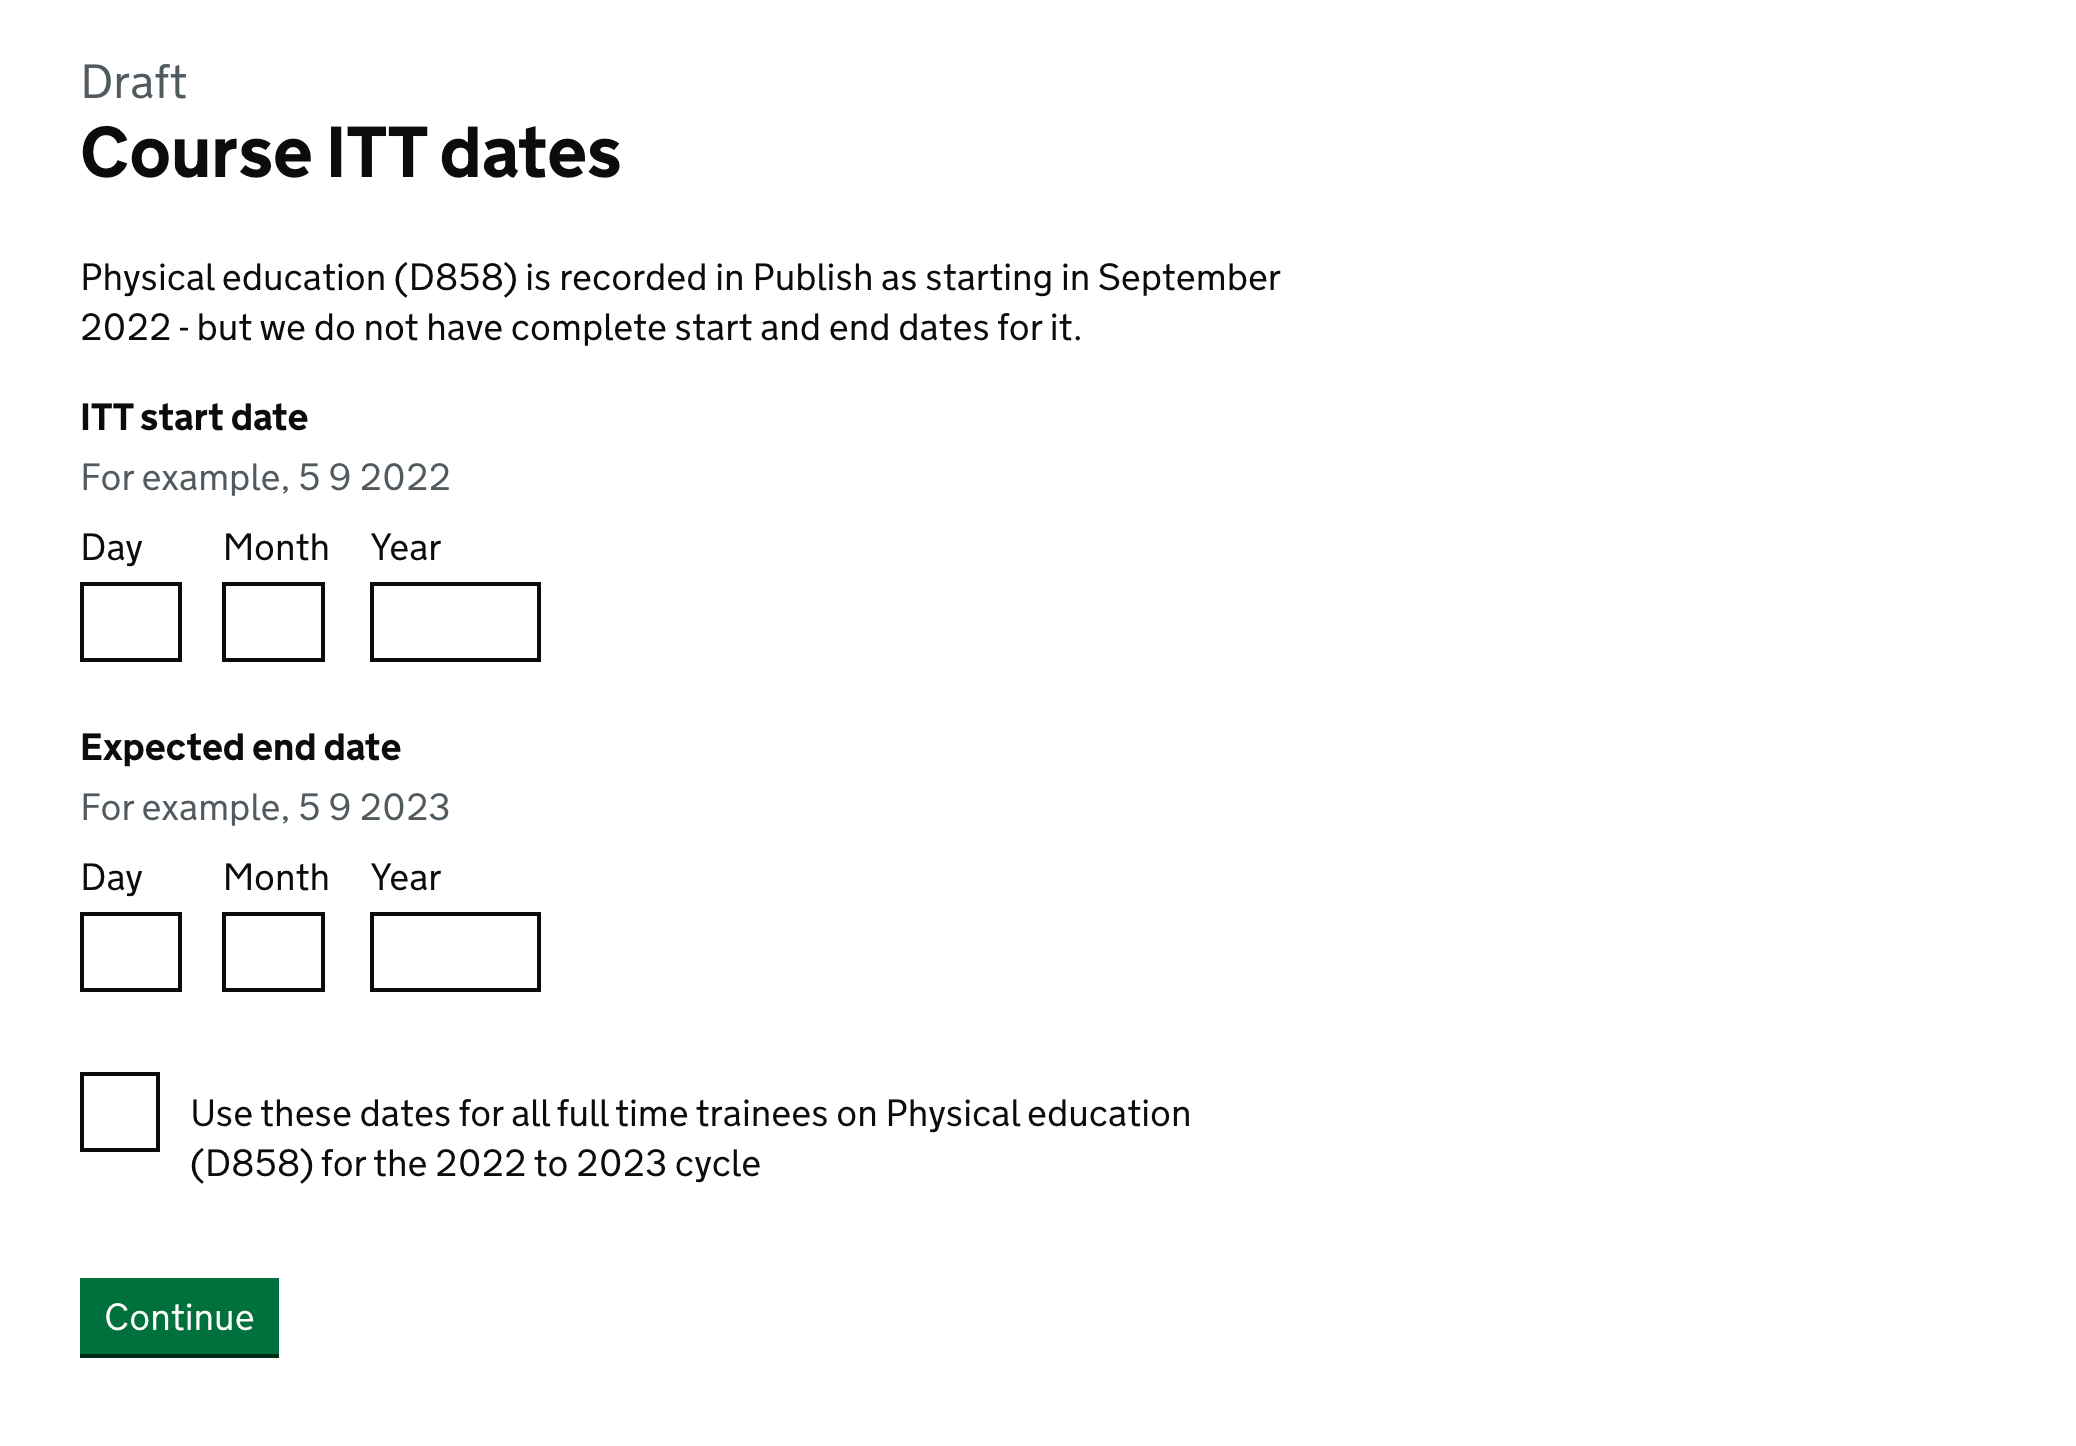 A screenshot of the course itt dates form, showing two sets of date inputs. The first is 'ITT start date', and the second is 'Estimated end date'.